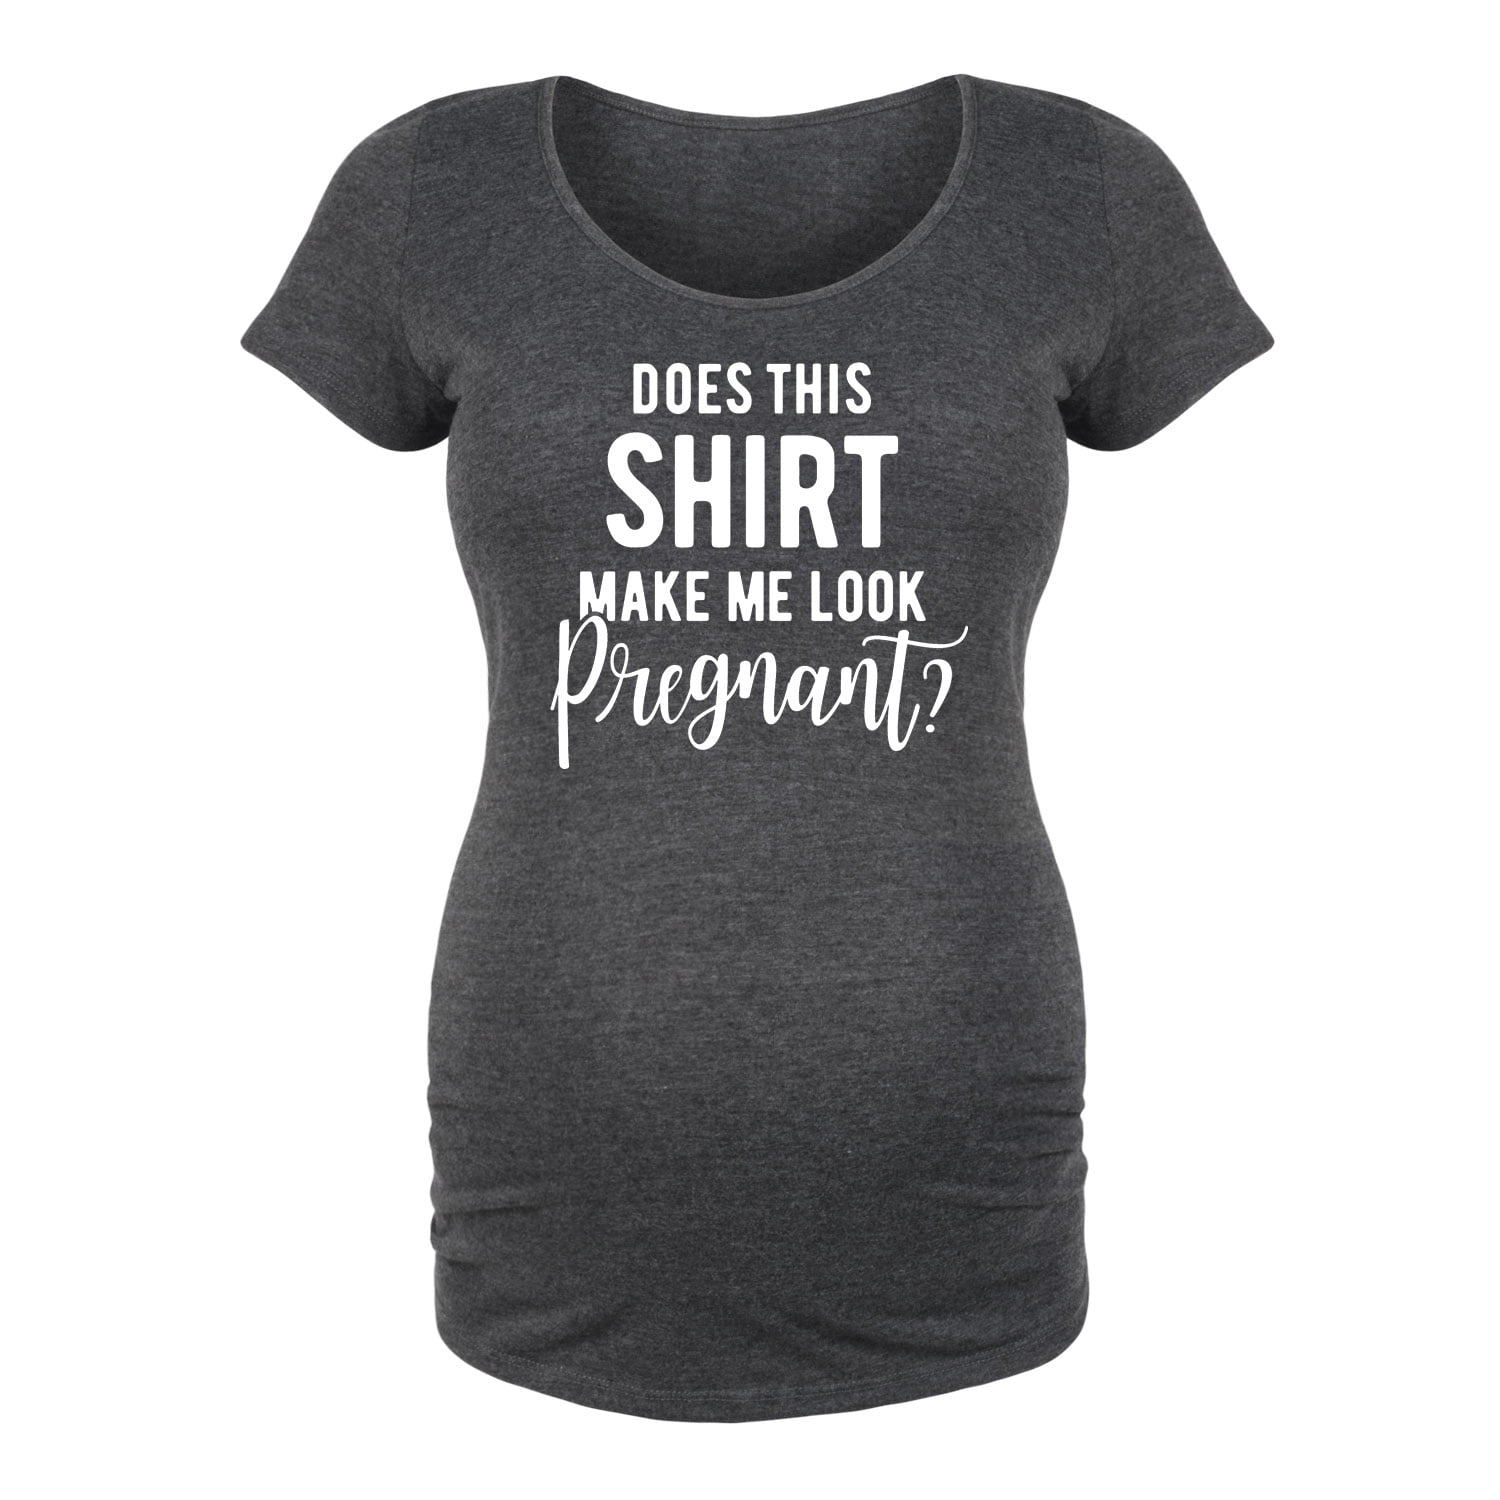 Bloom Maternity - Does Shirt Make Me Pregnant - Maternity Scoop Neck T ...